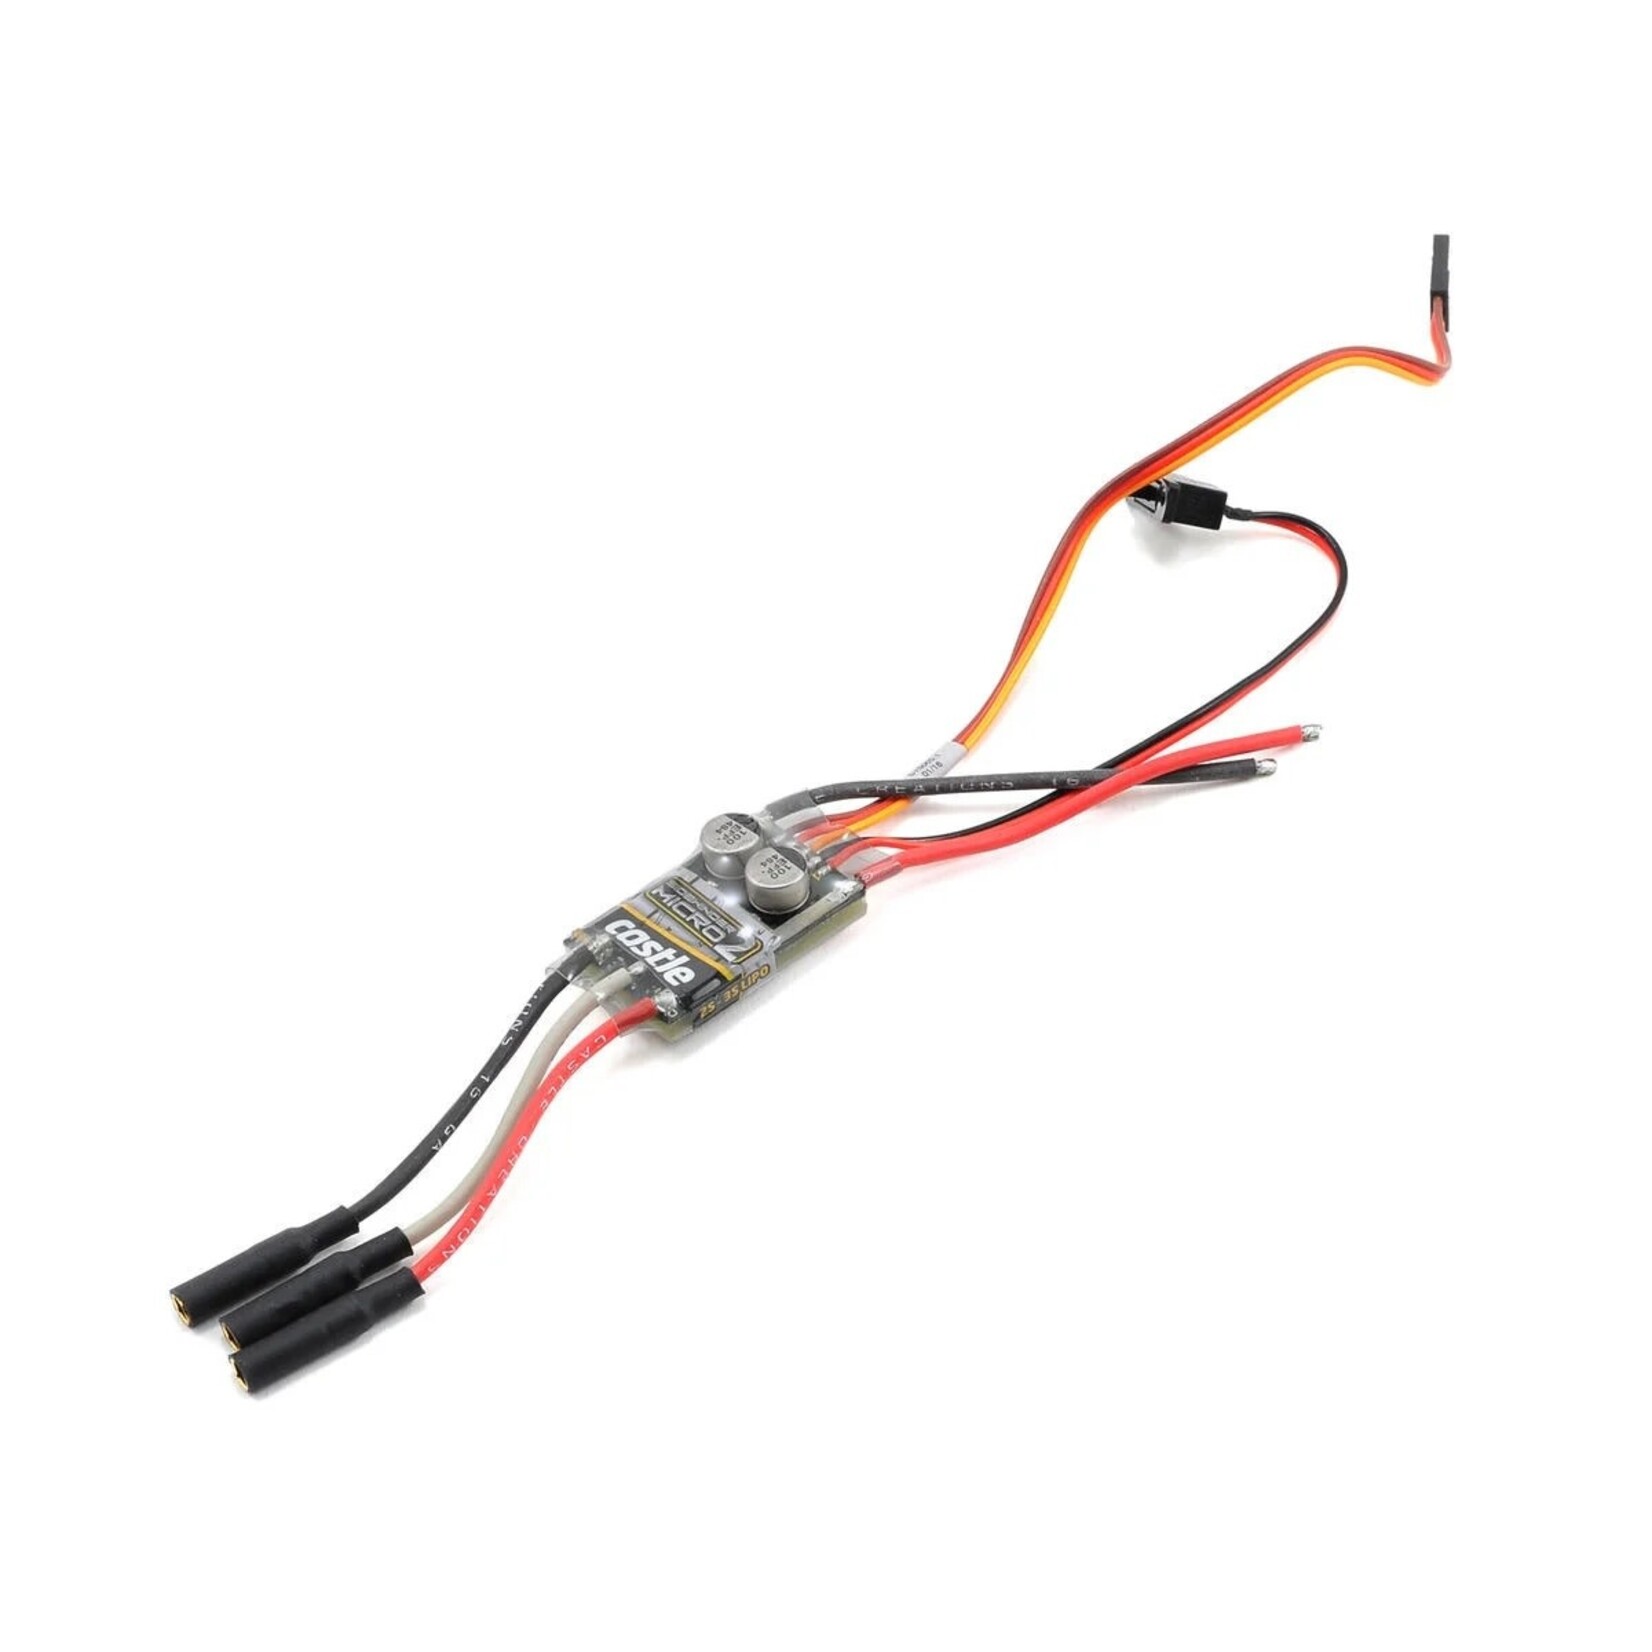 Castle Creations Castle Creations Sidewinder Micro 2 1/18th Scale Brushless ESC #010-0150-00